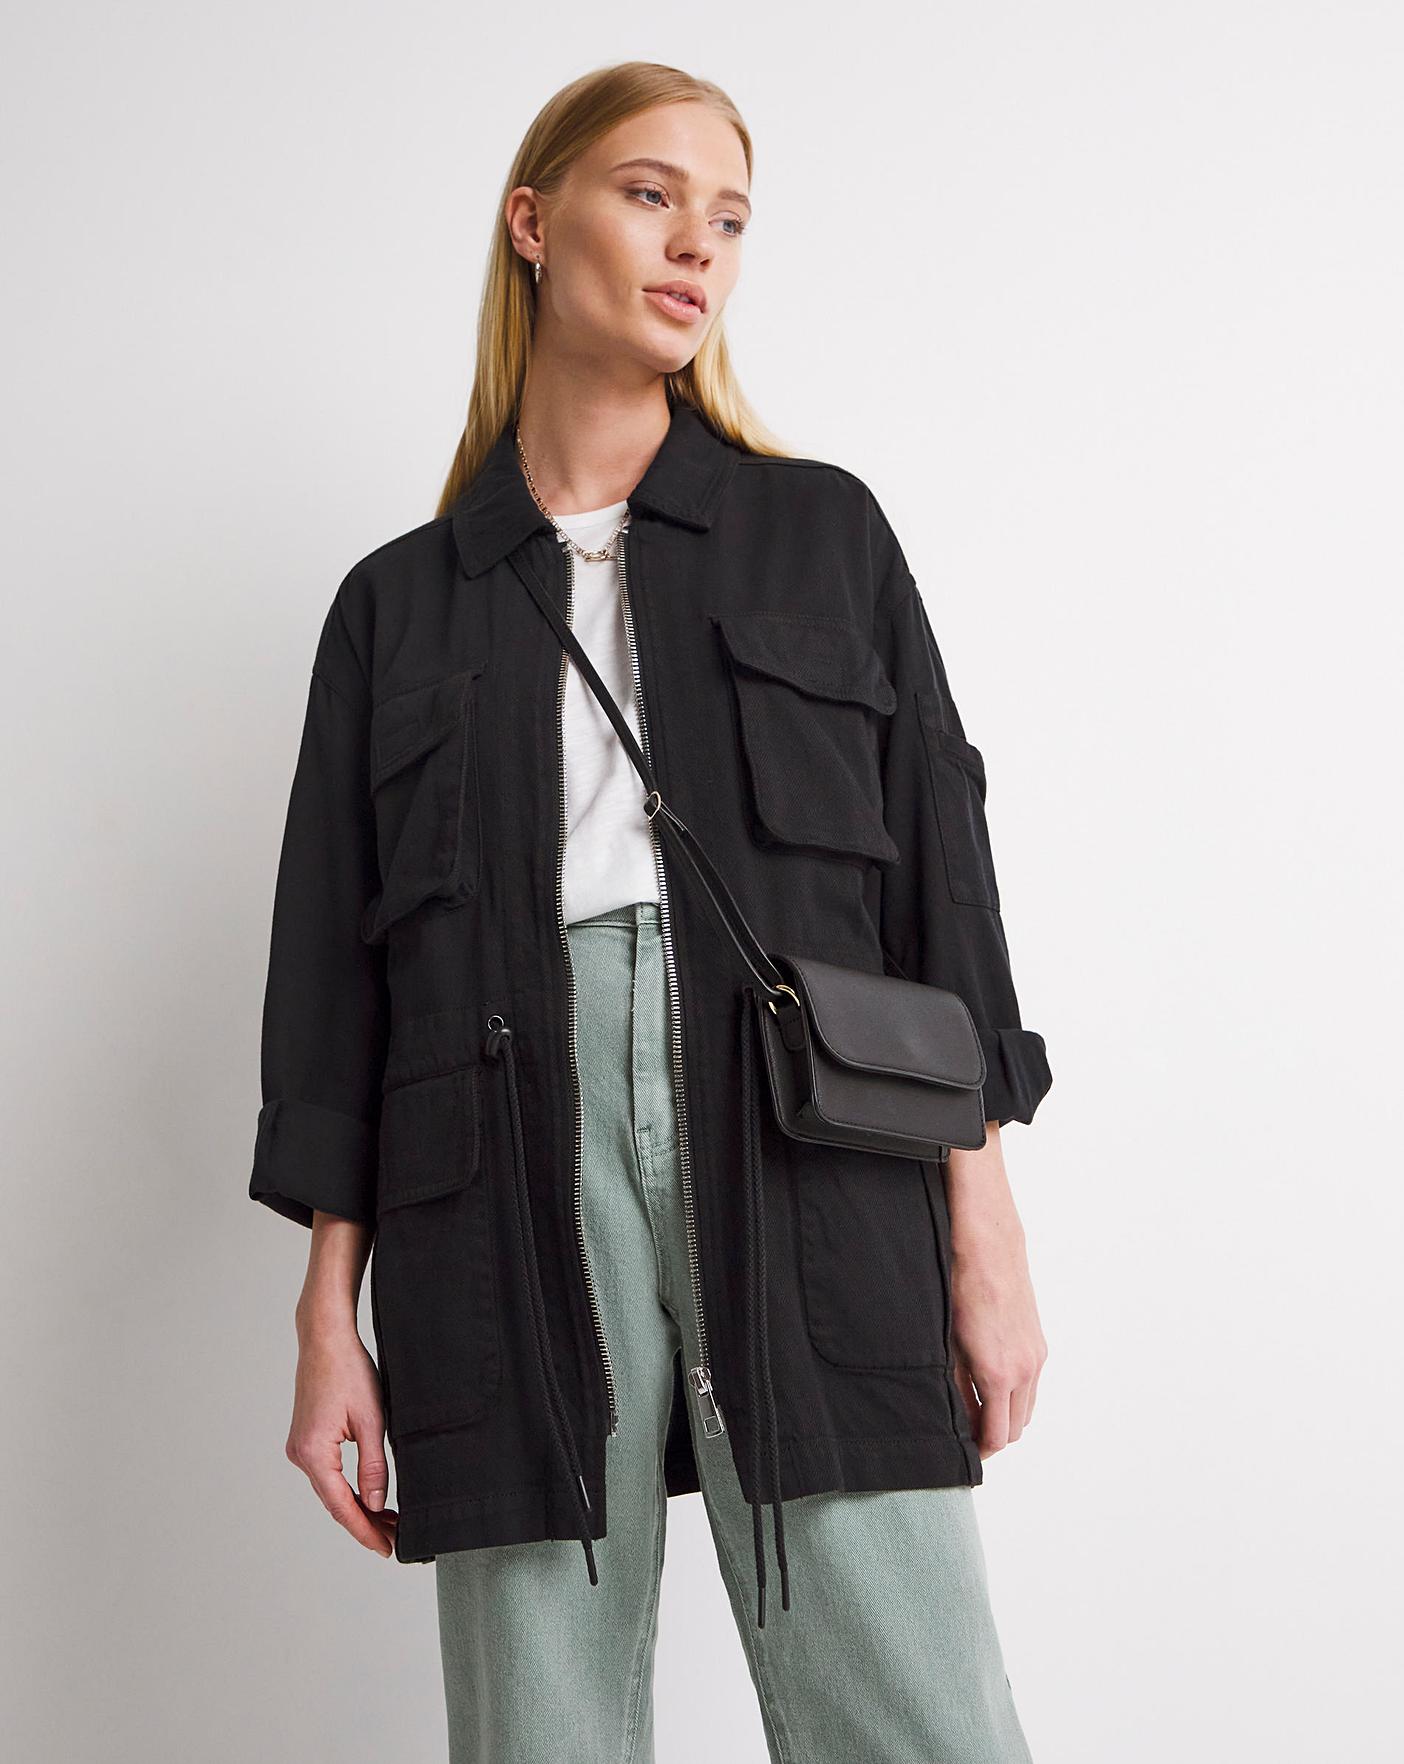 Whistles Carly Military Jacket | J D Williams